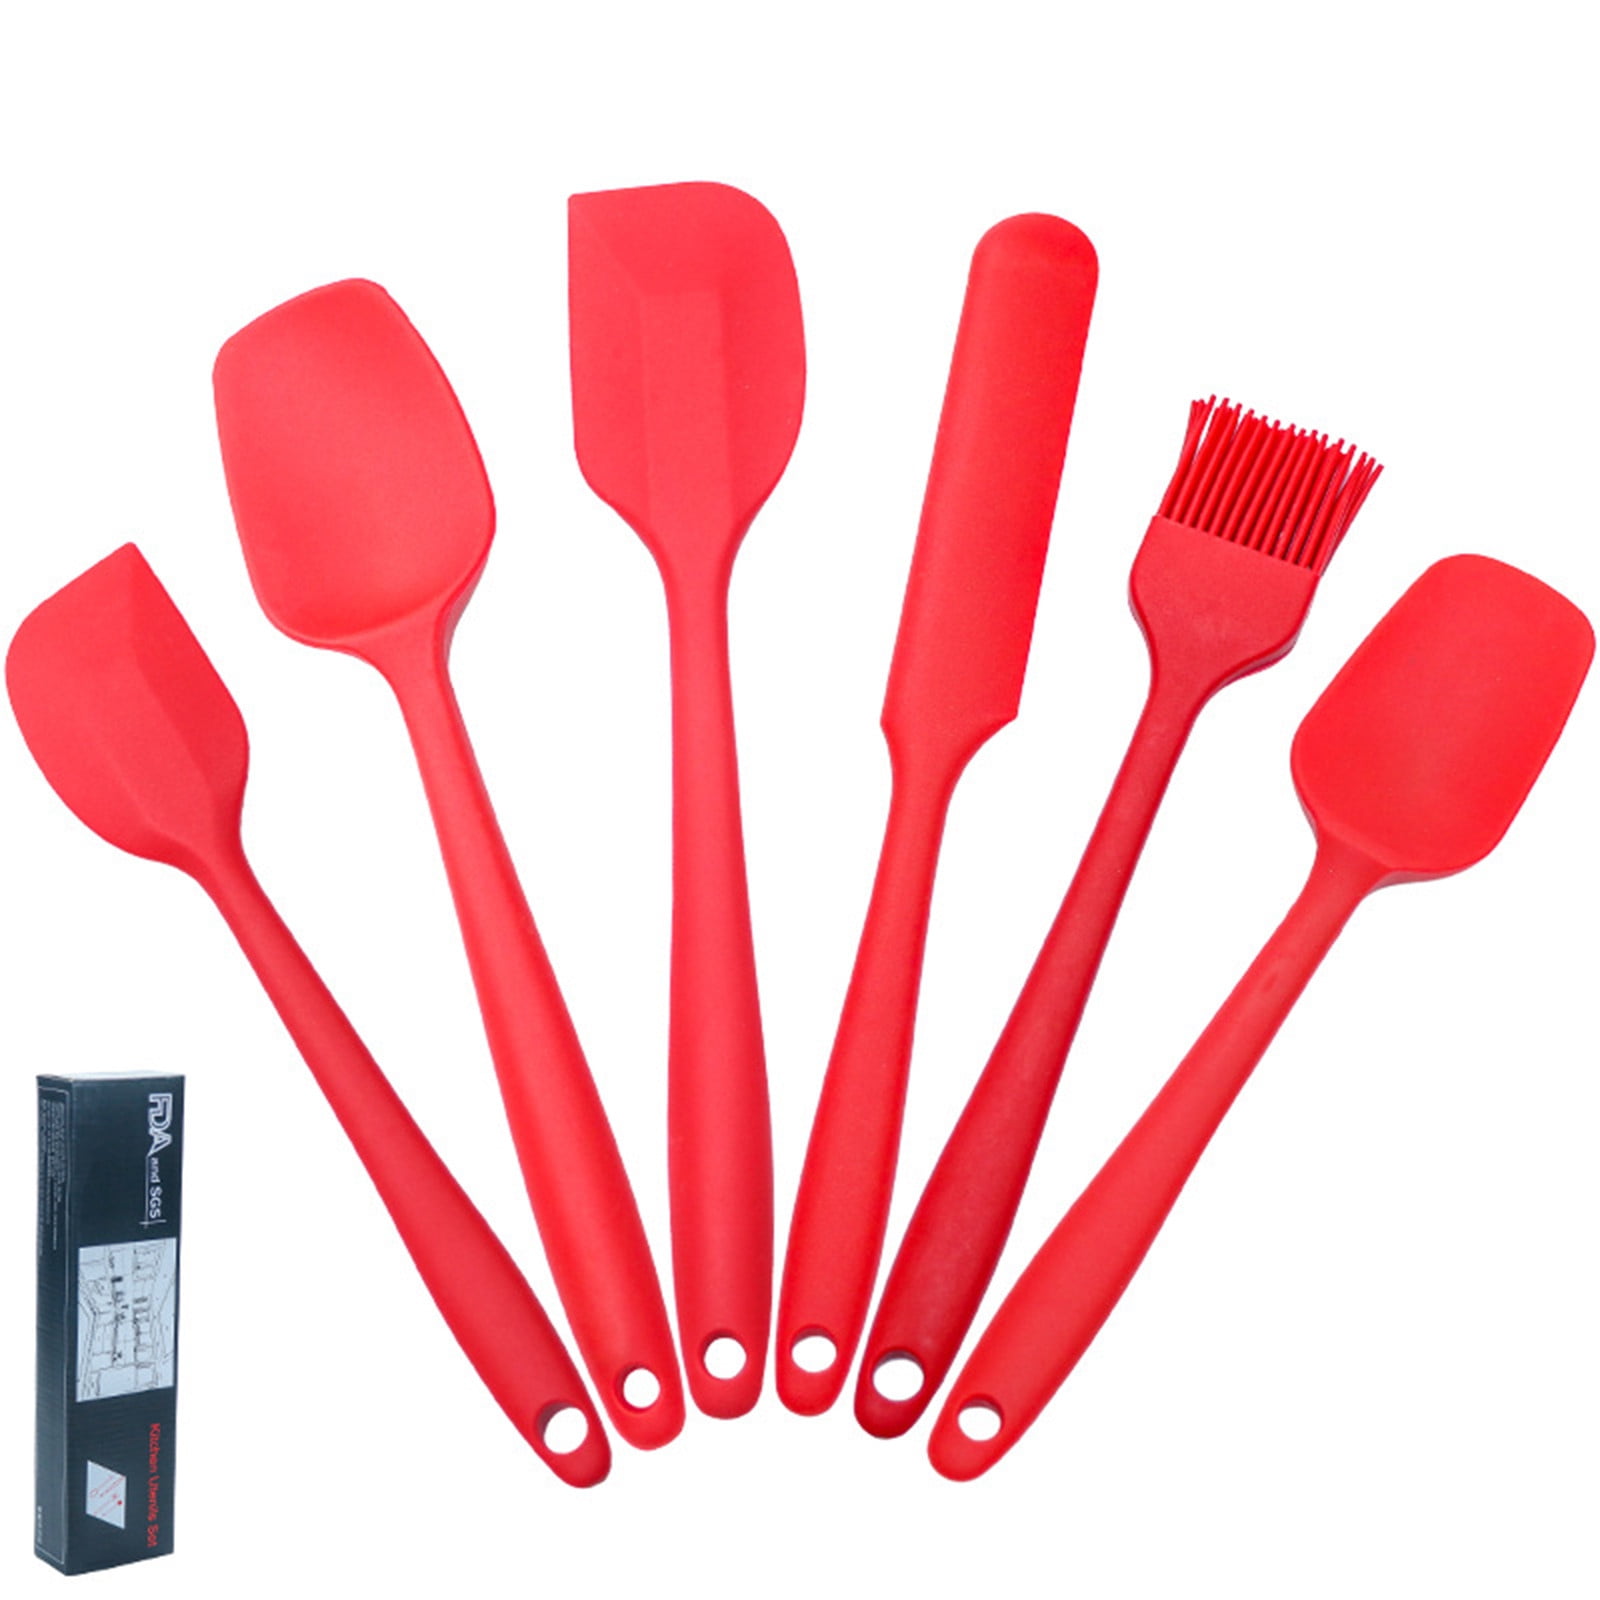 Kaluns Heat Resistant Rubber Silicone Spatula (Set of 5), Red